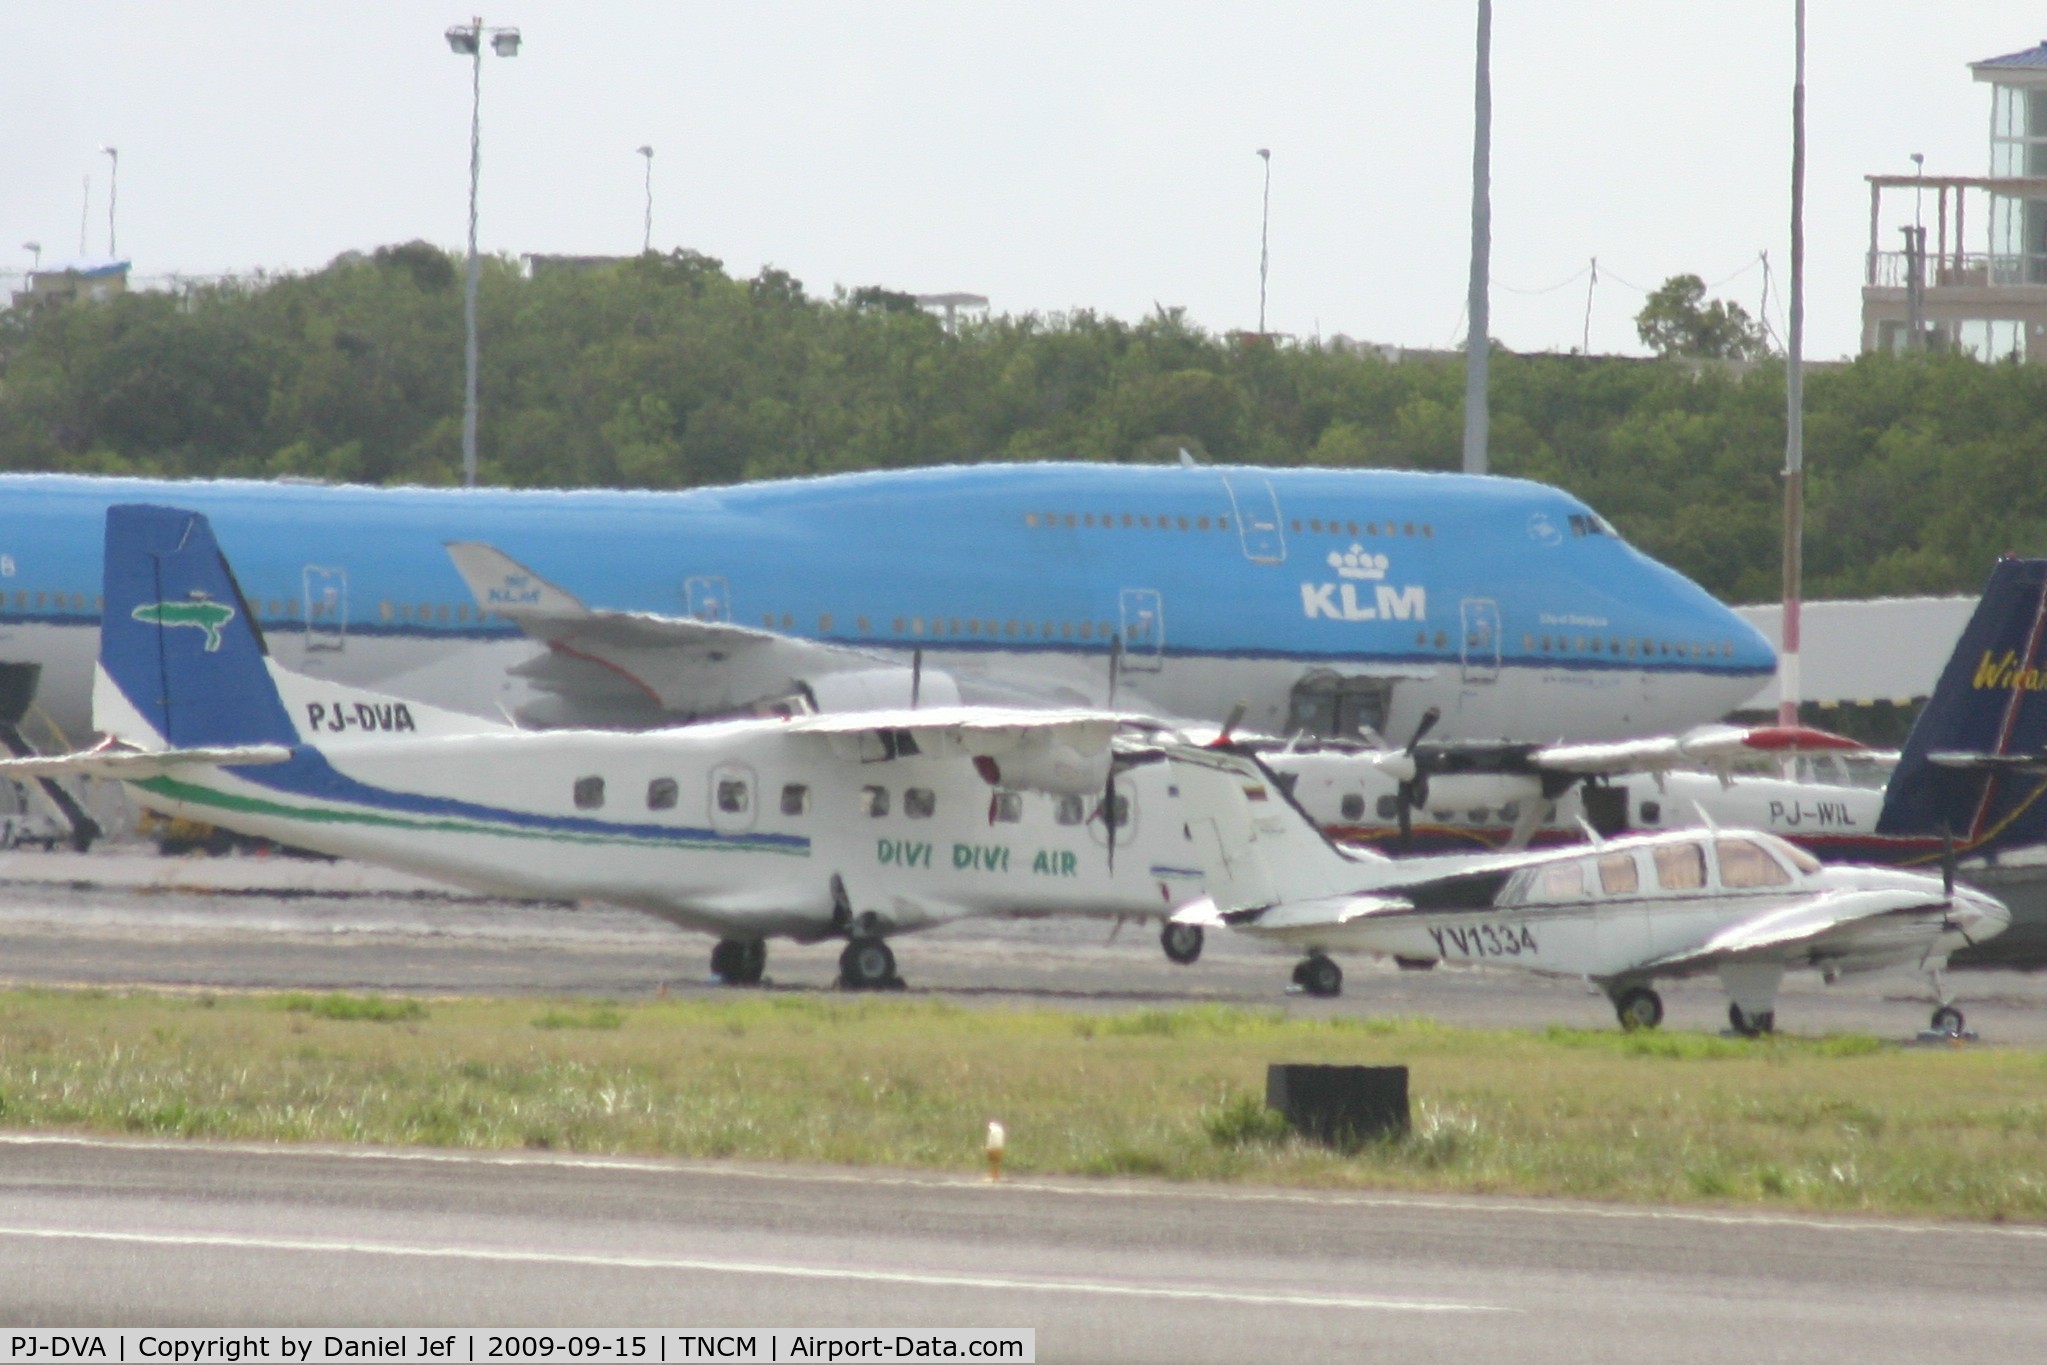 PJ-DVA, 1986 Dornier 228-202 C/N 8100, a Next visitor to our island never been seen befor